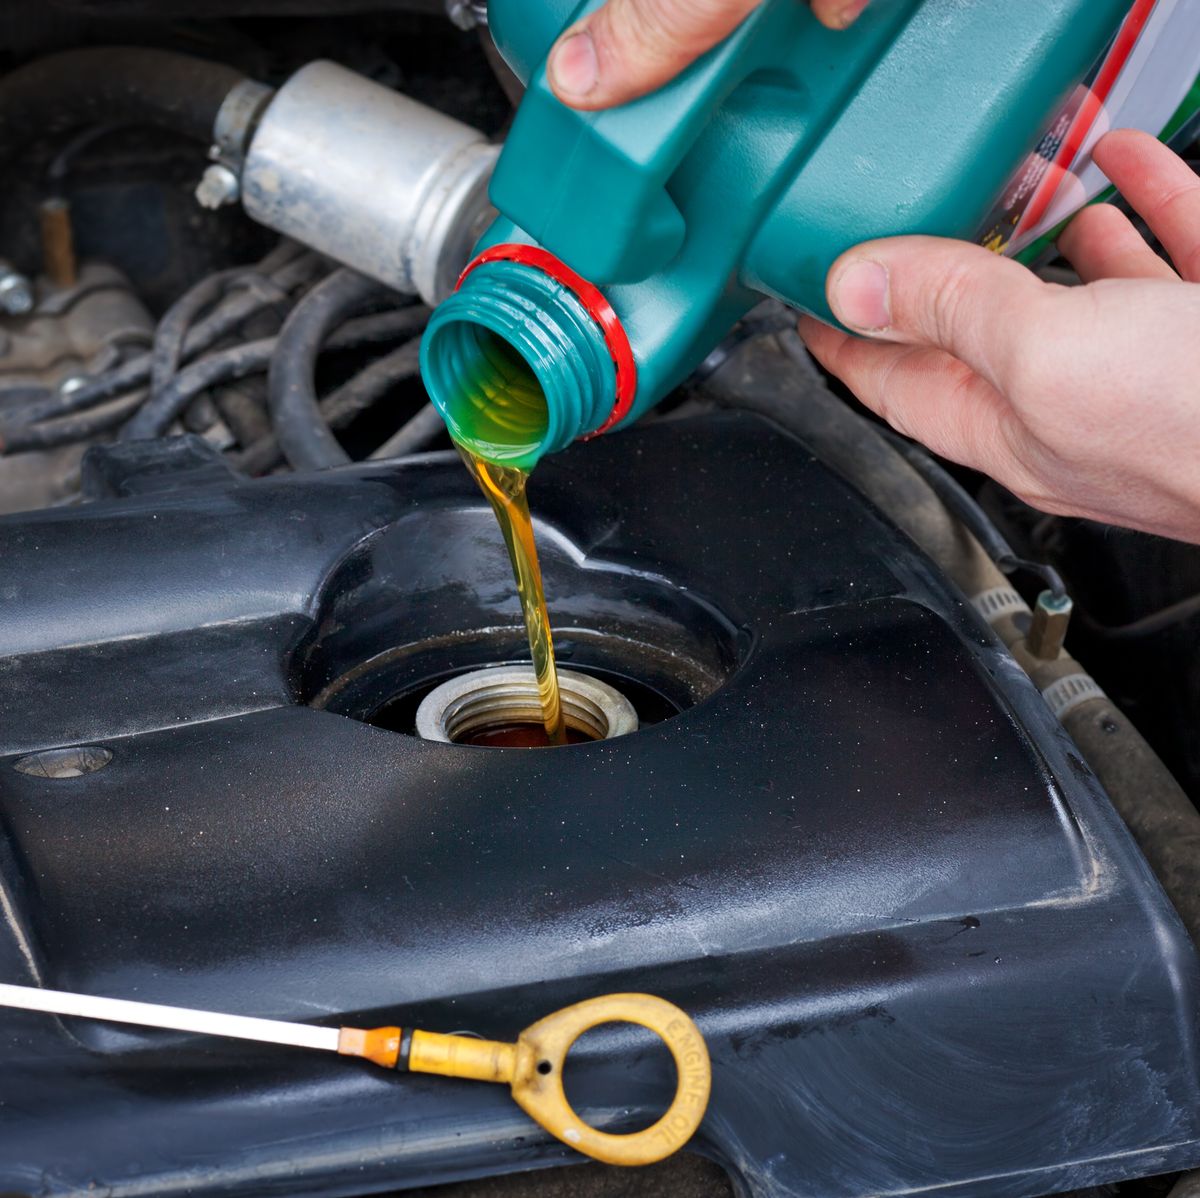 Step-by-Step Guide: How to Top Up Your Car's Washer Fluid